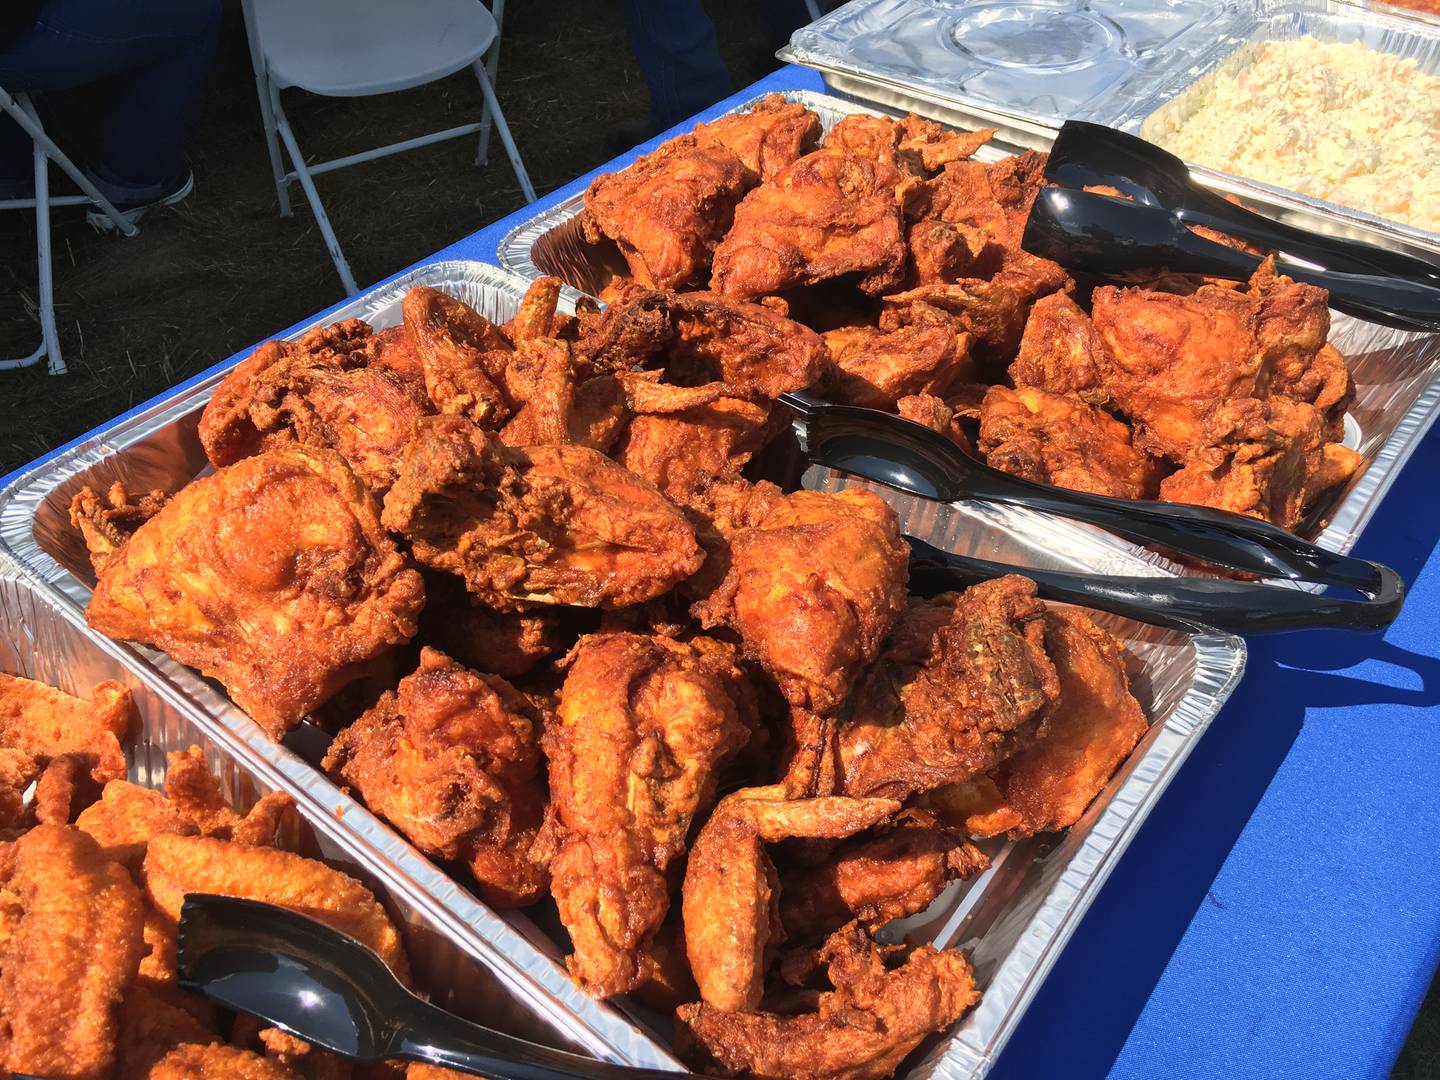 Fried Chicken Festival canceled amid increase in COVID-19 cases, organizers say